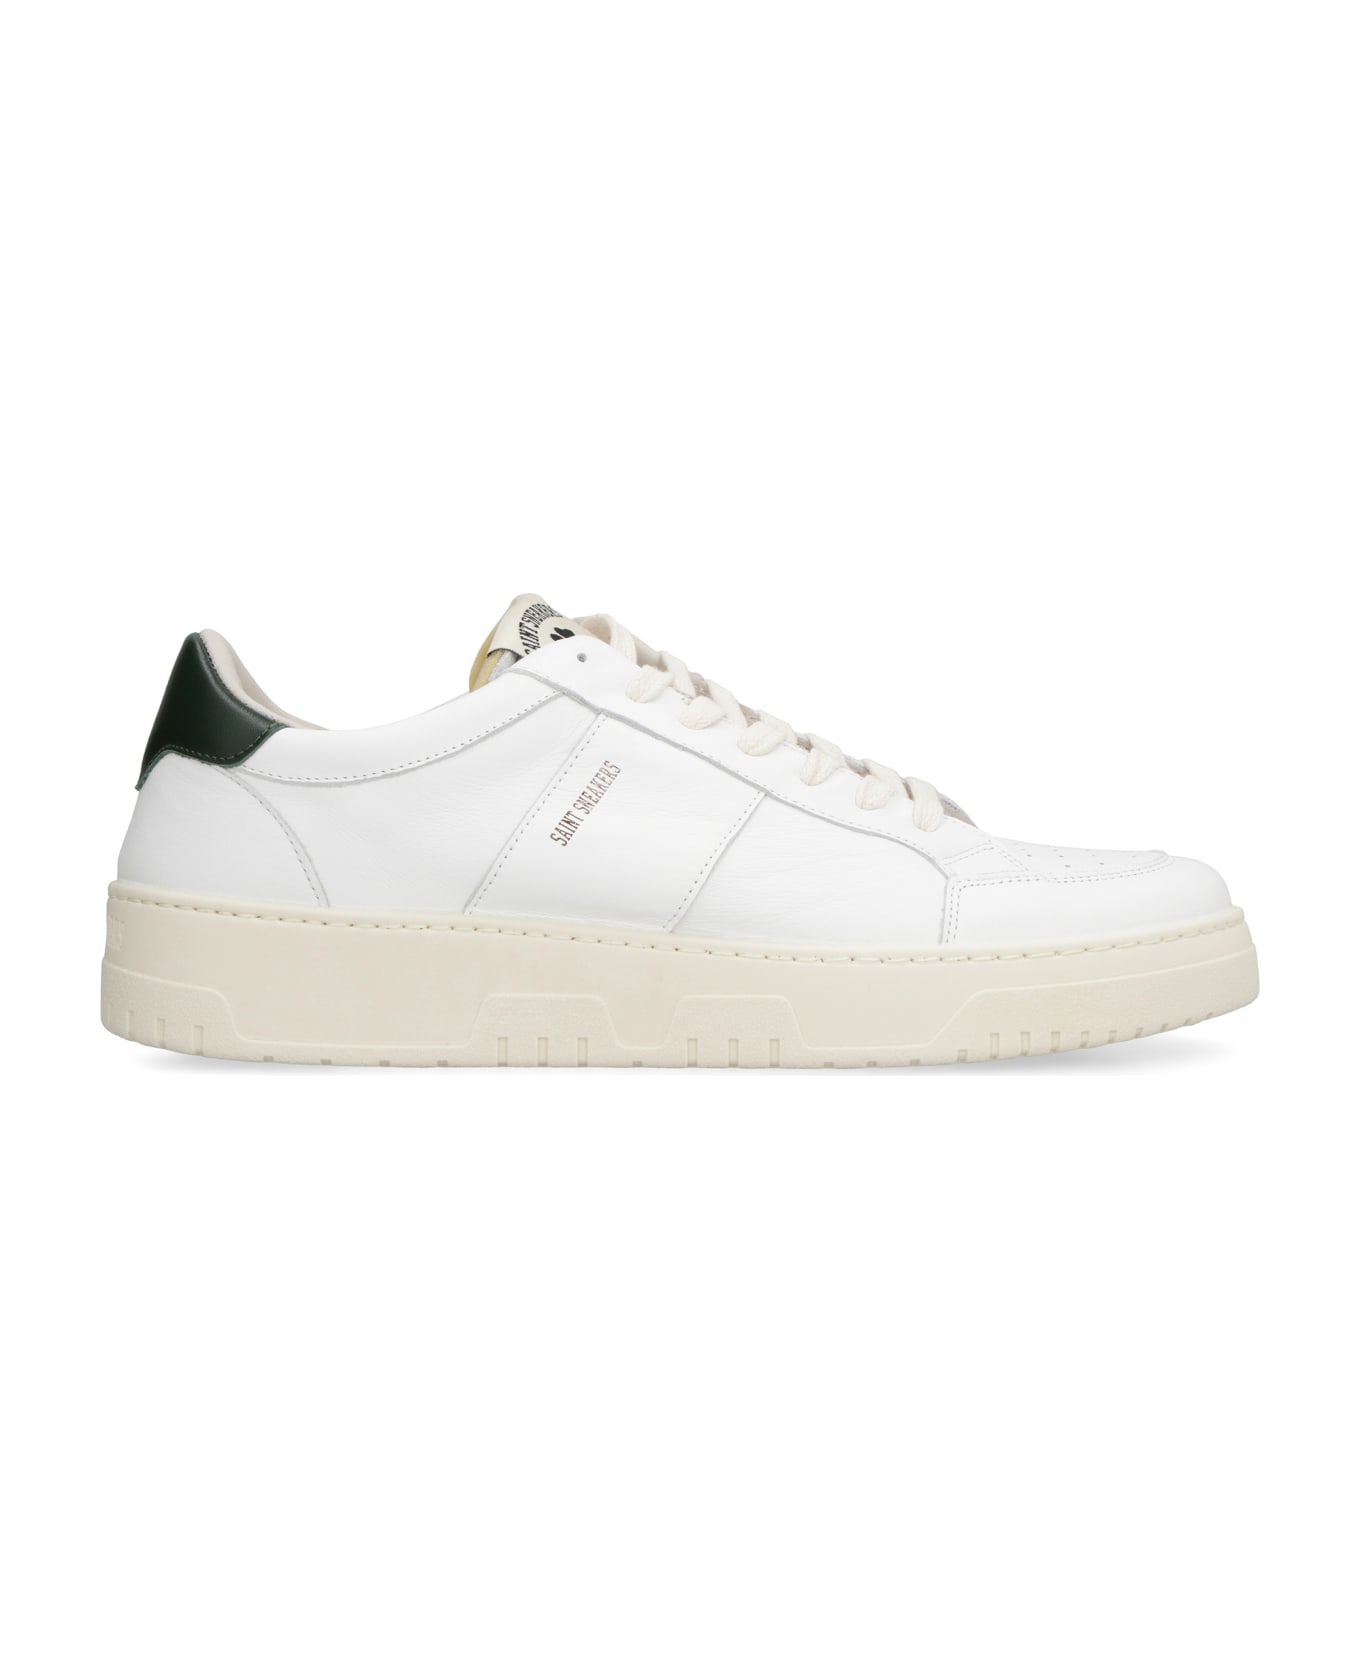 Saint Sneakers Golf Leather Low-top Sneakers - White/green